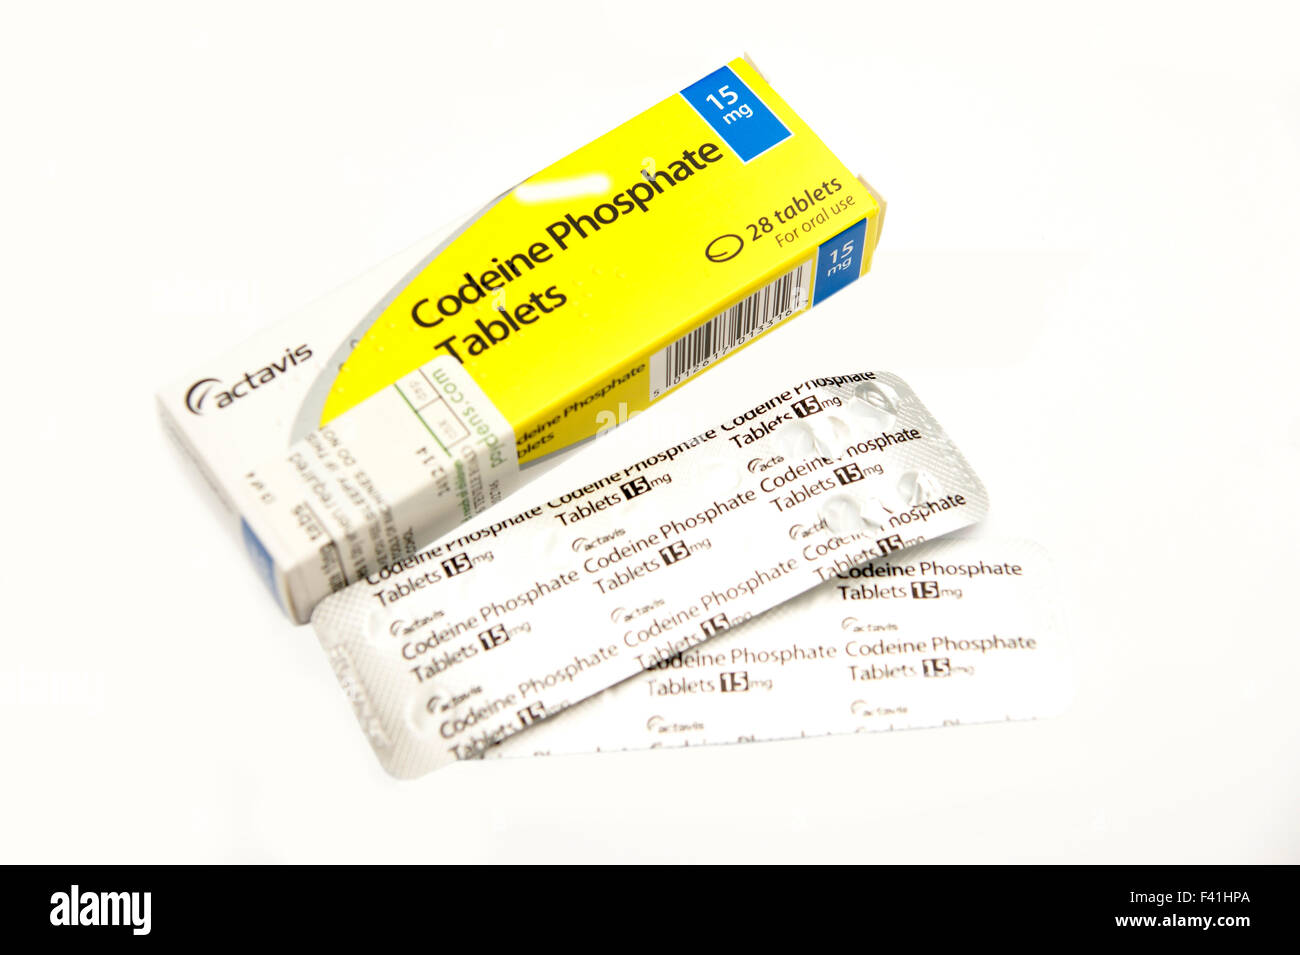 Codeine phosphate tablets (belongs to a group of medicines called opioid analgesics which acts to relieve pain) Stock Photo